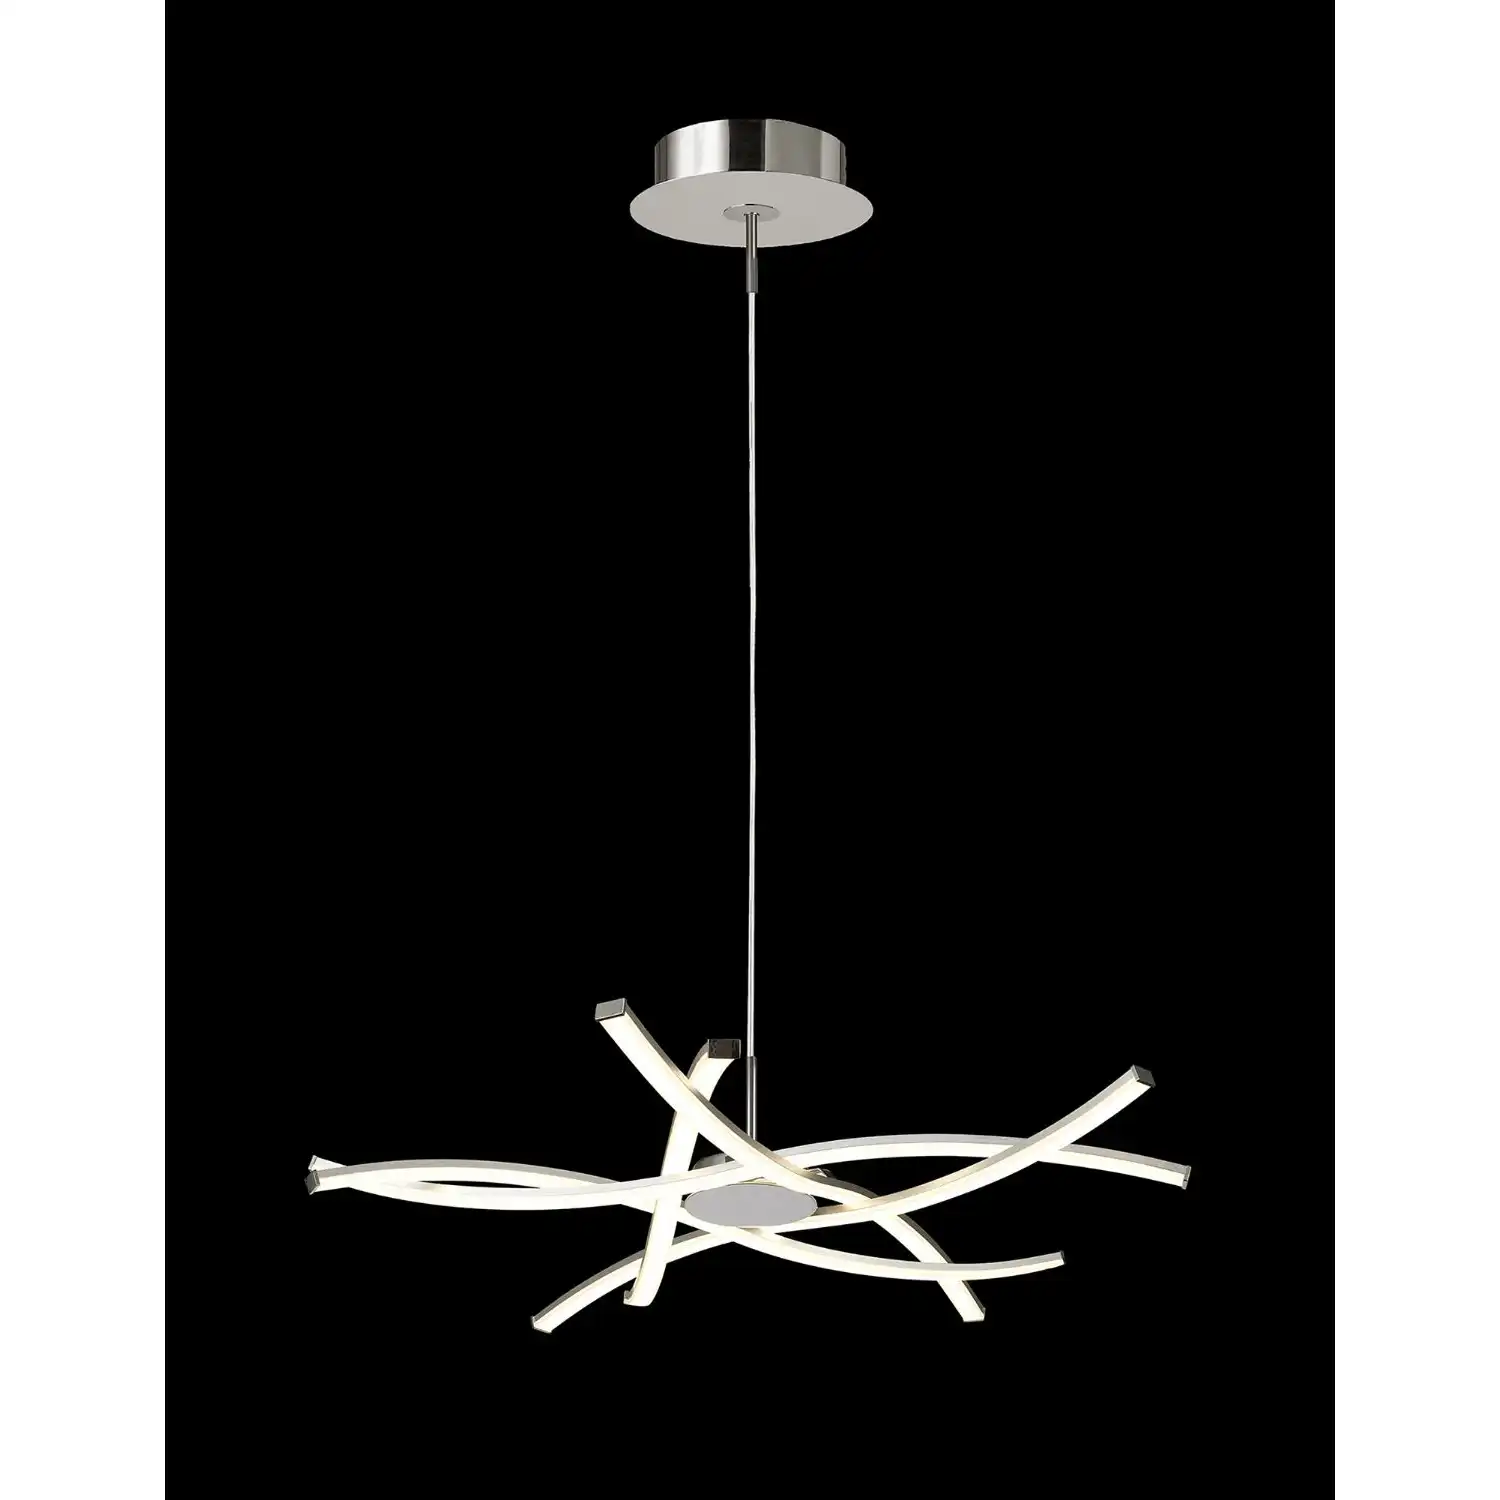 Aire LED Pendant 69cm Round 42W 3000K, 3700lm, Dimmable Silver Frosted Acrylic Polished Chrome, 3yrs Warranty